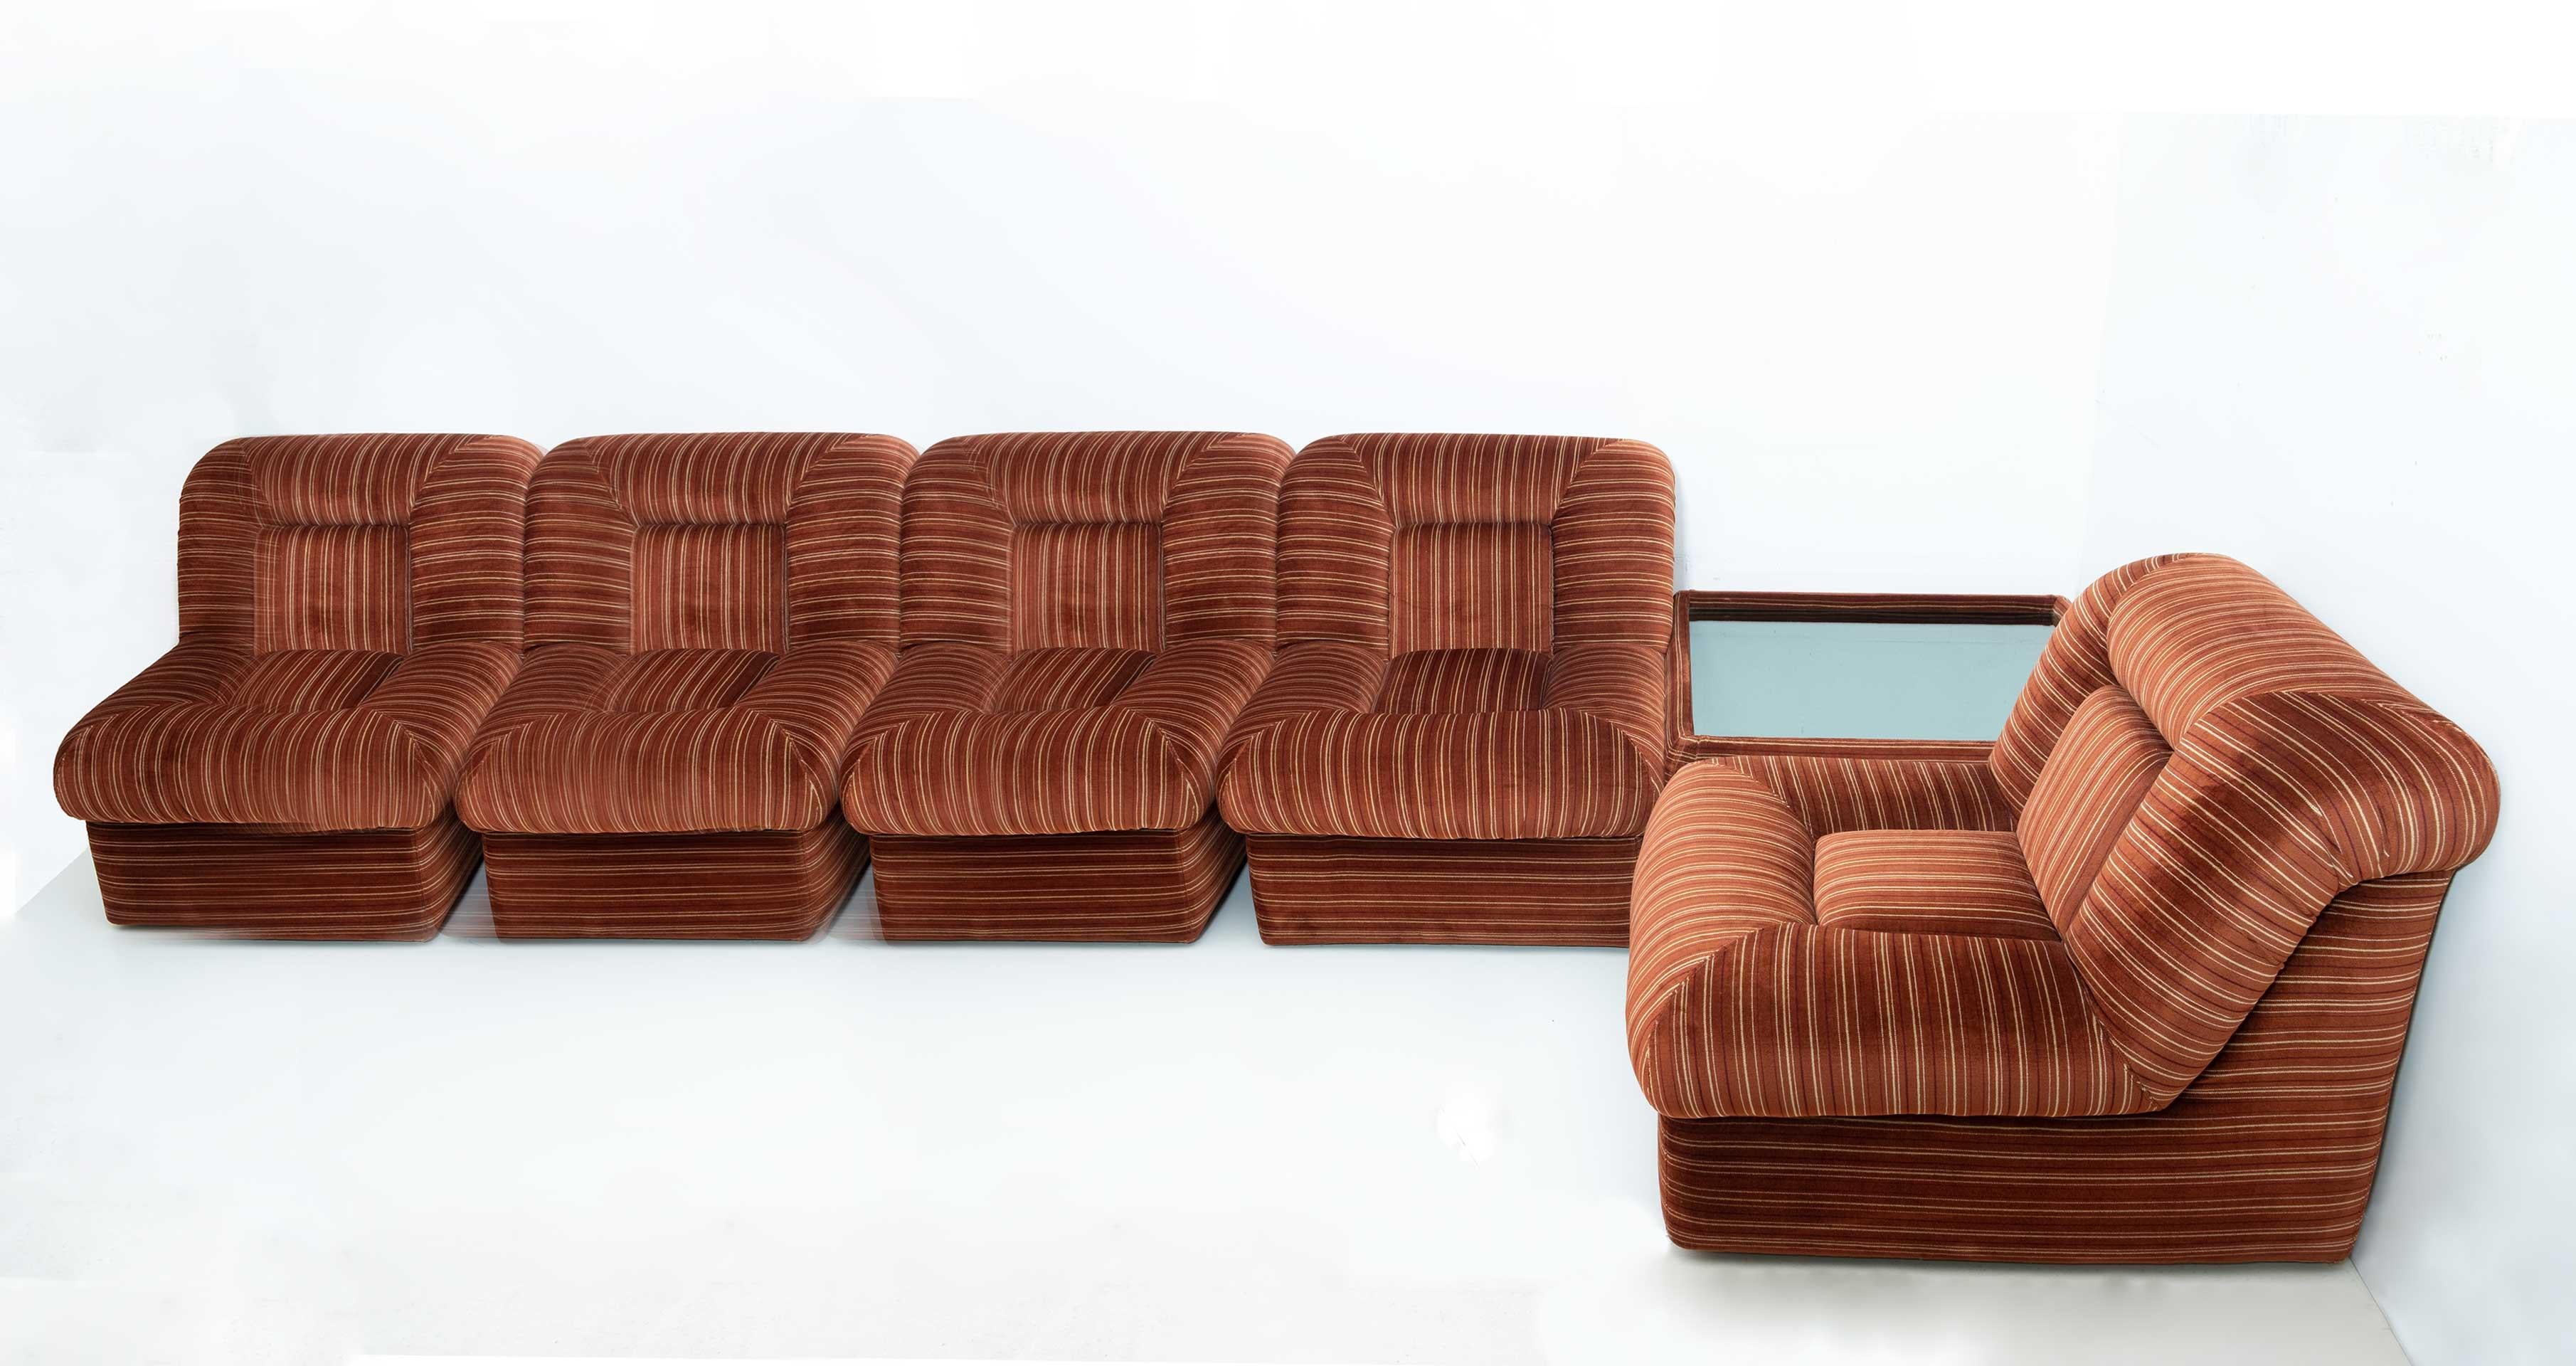 Beautiful velvet modular sofa, consisting of 5 armchairs and a coffee table.
The coffee table has a smoked mirror as a top.
The Italian sofa is in dark orange hammered velvet, original from the period, in good condition, as shown in the photos. Its